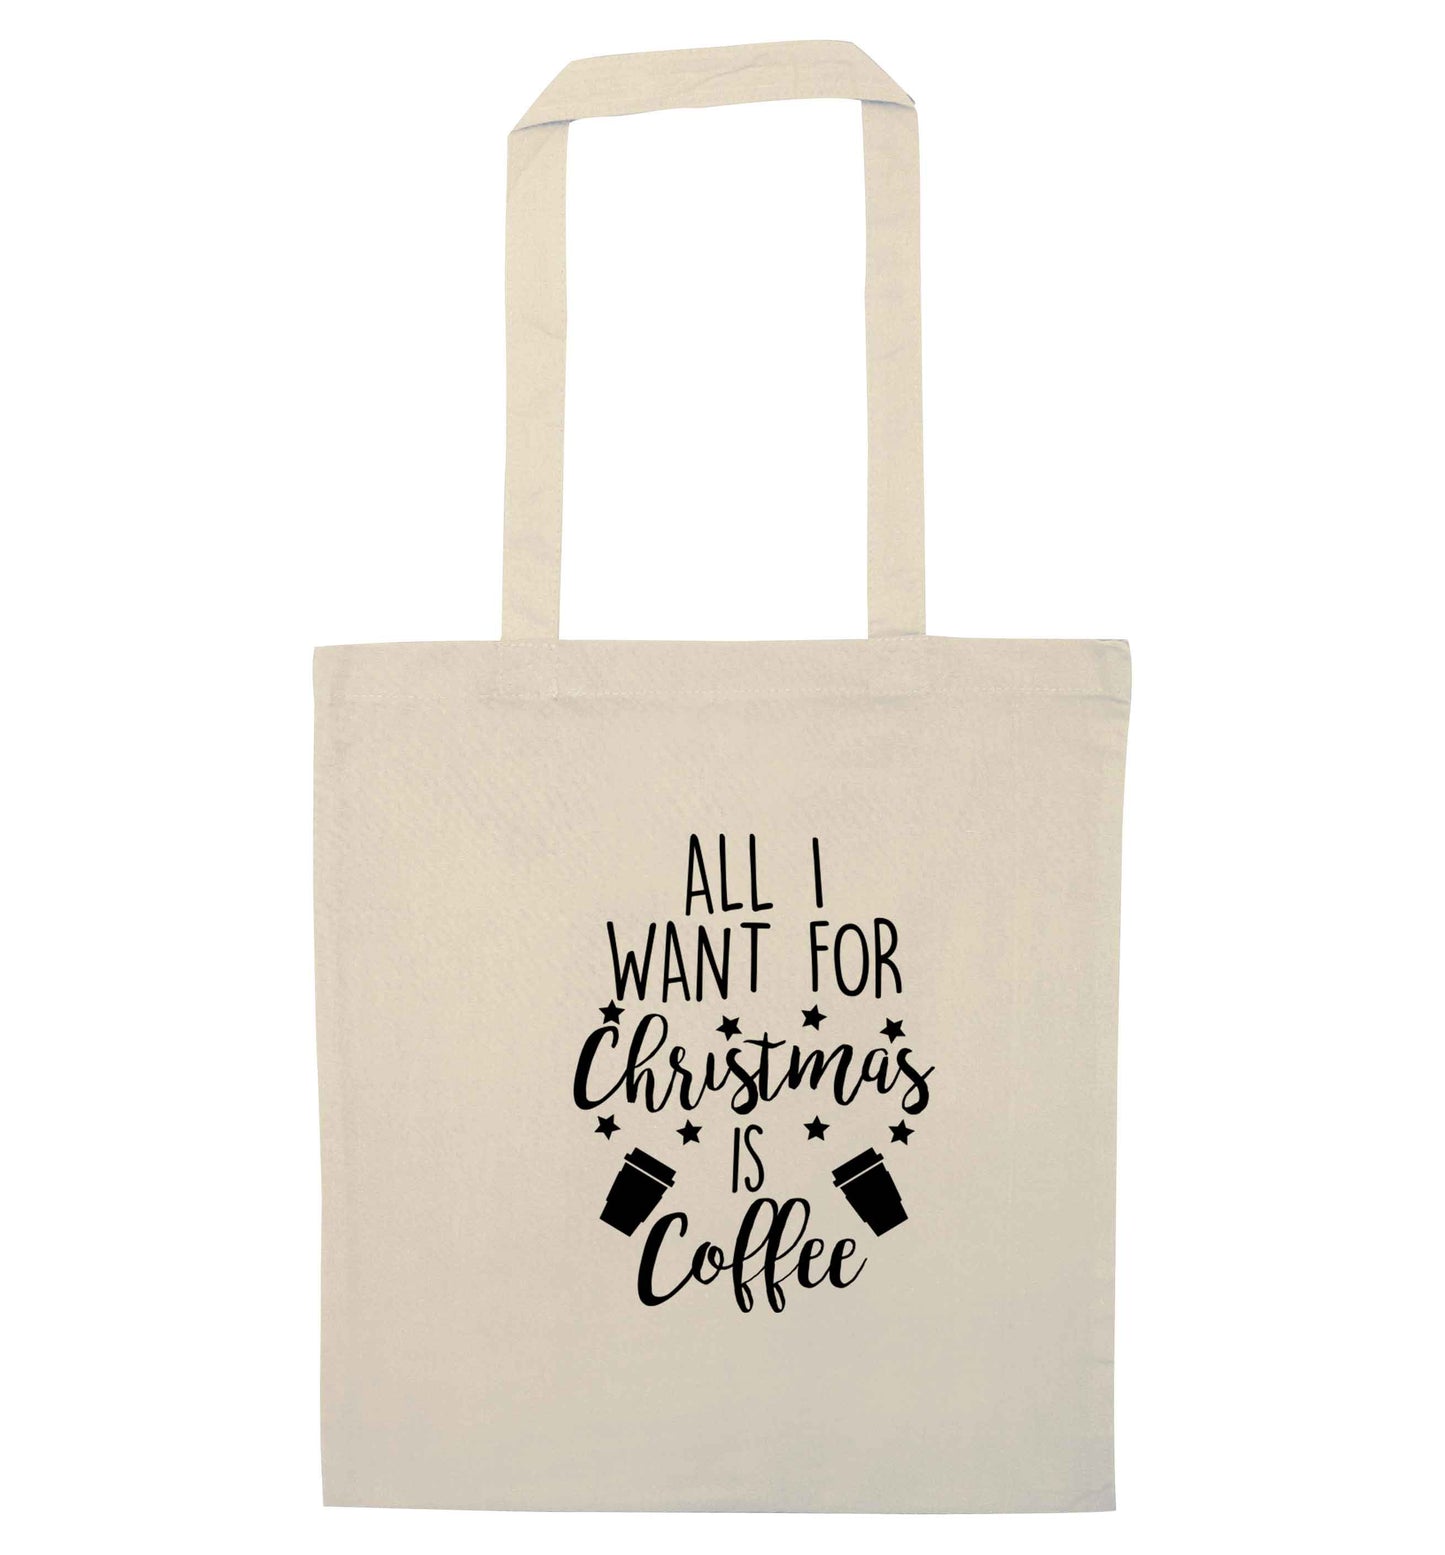 All I want for Christmas is coffee natural tote bag